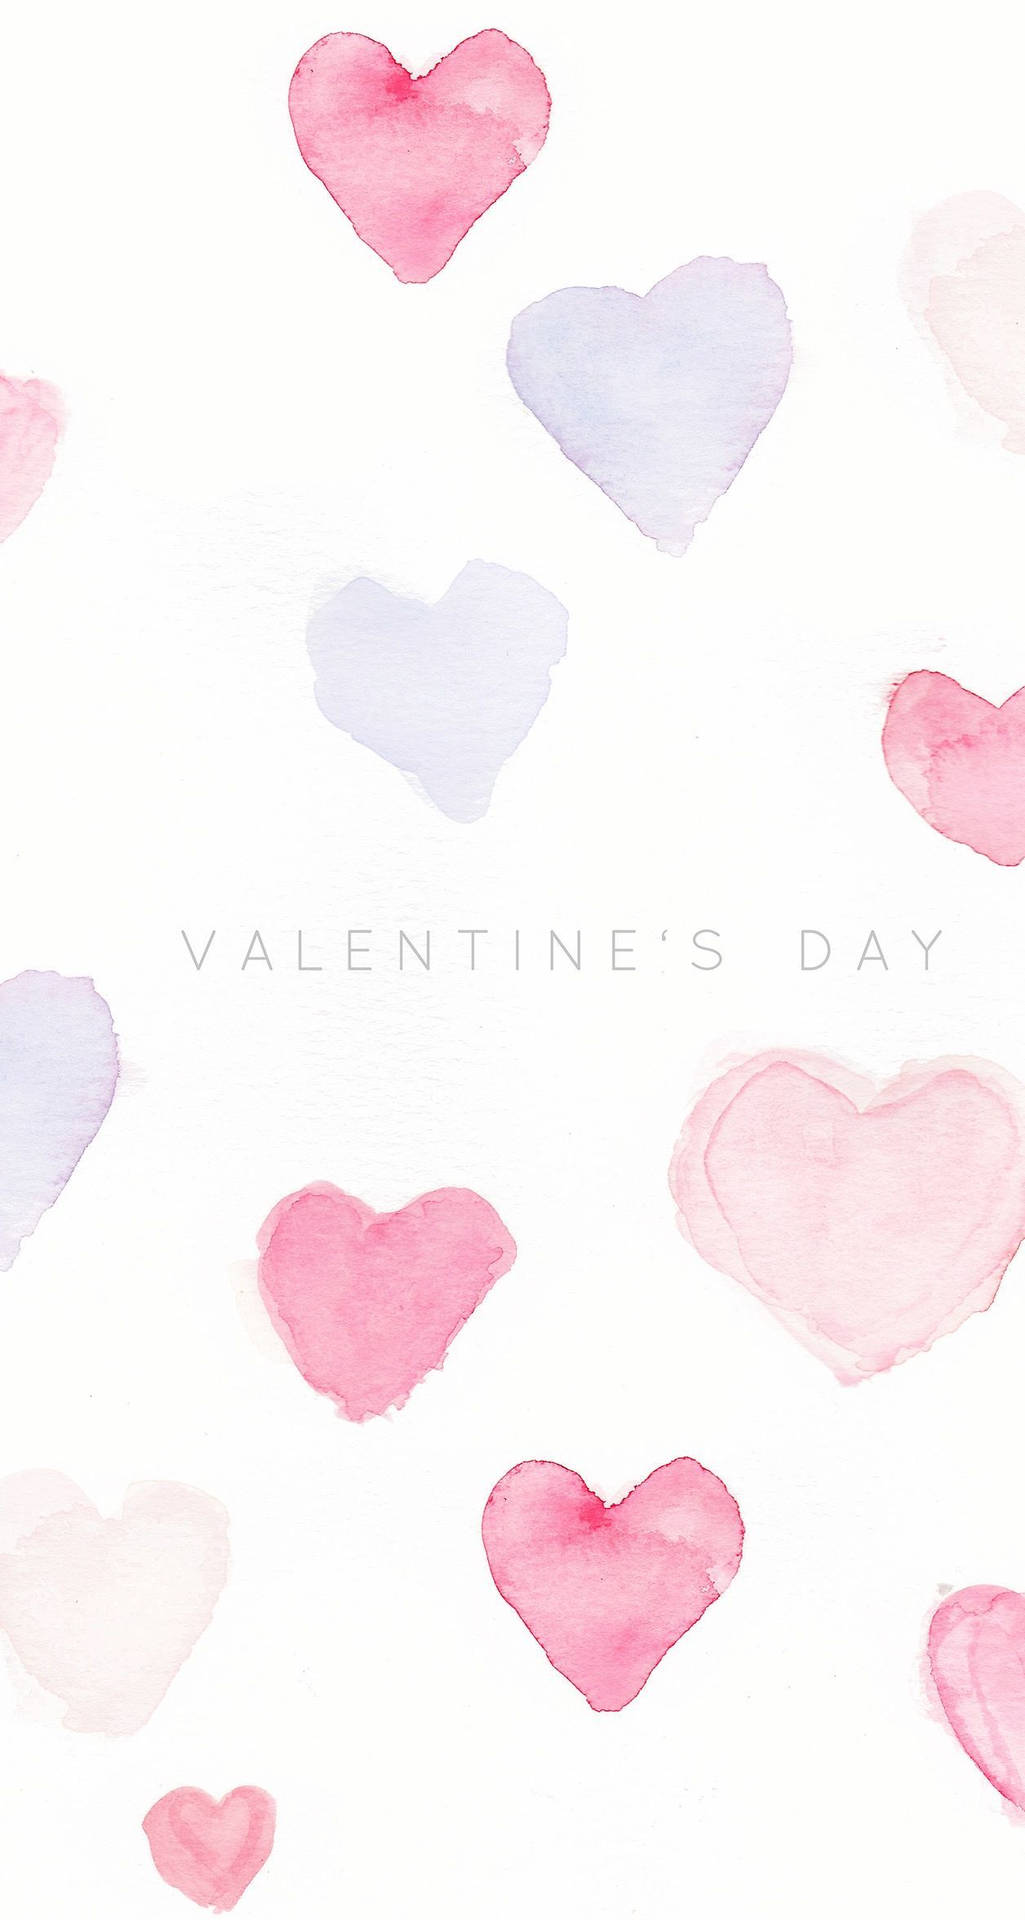 Celebrate the Love this Valentine’s Day with this cute illustration Wallpaper